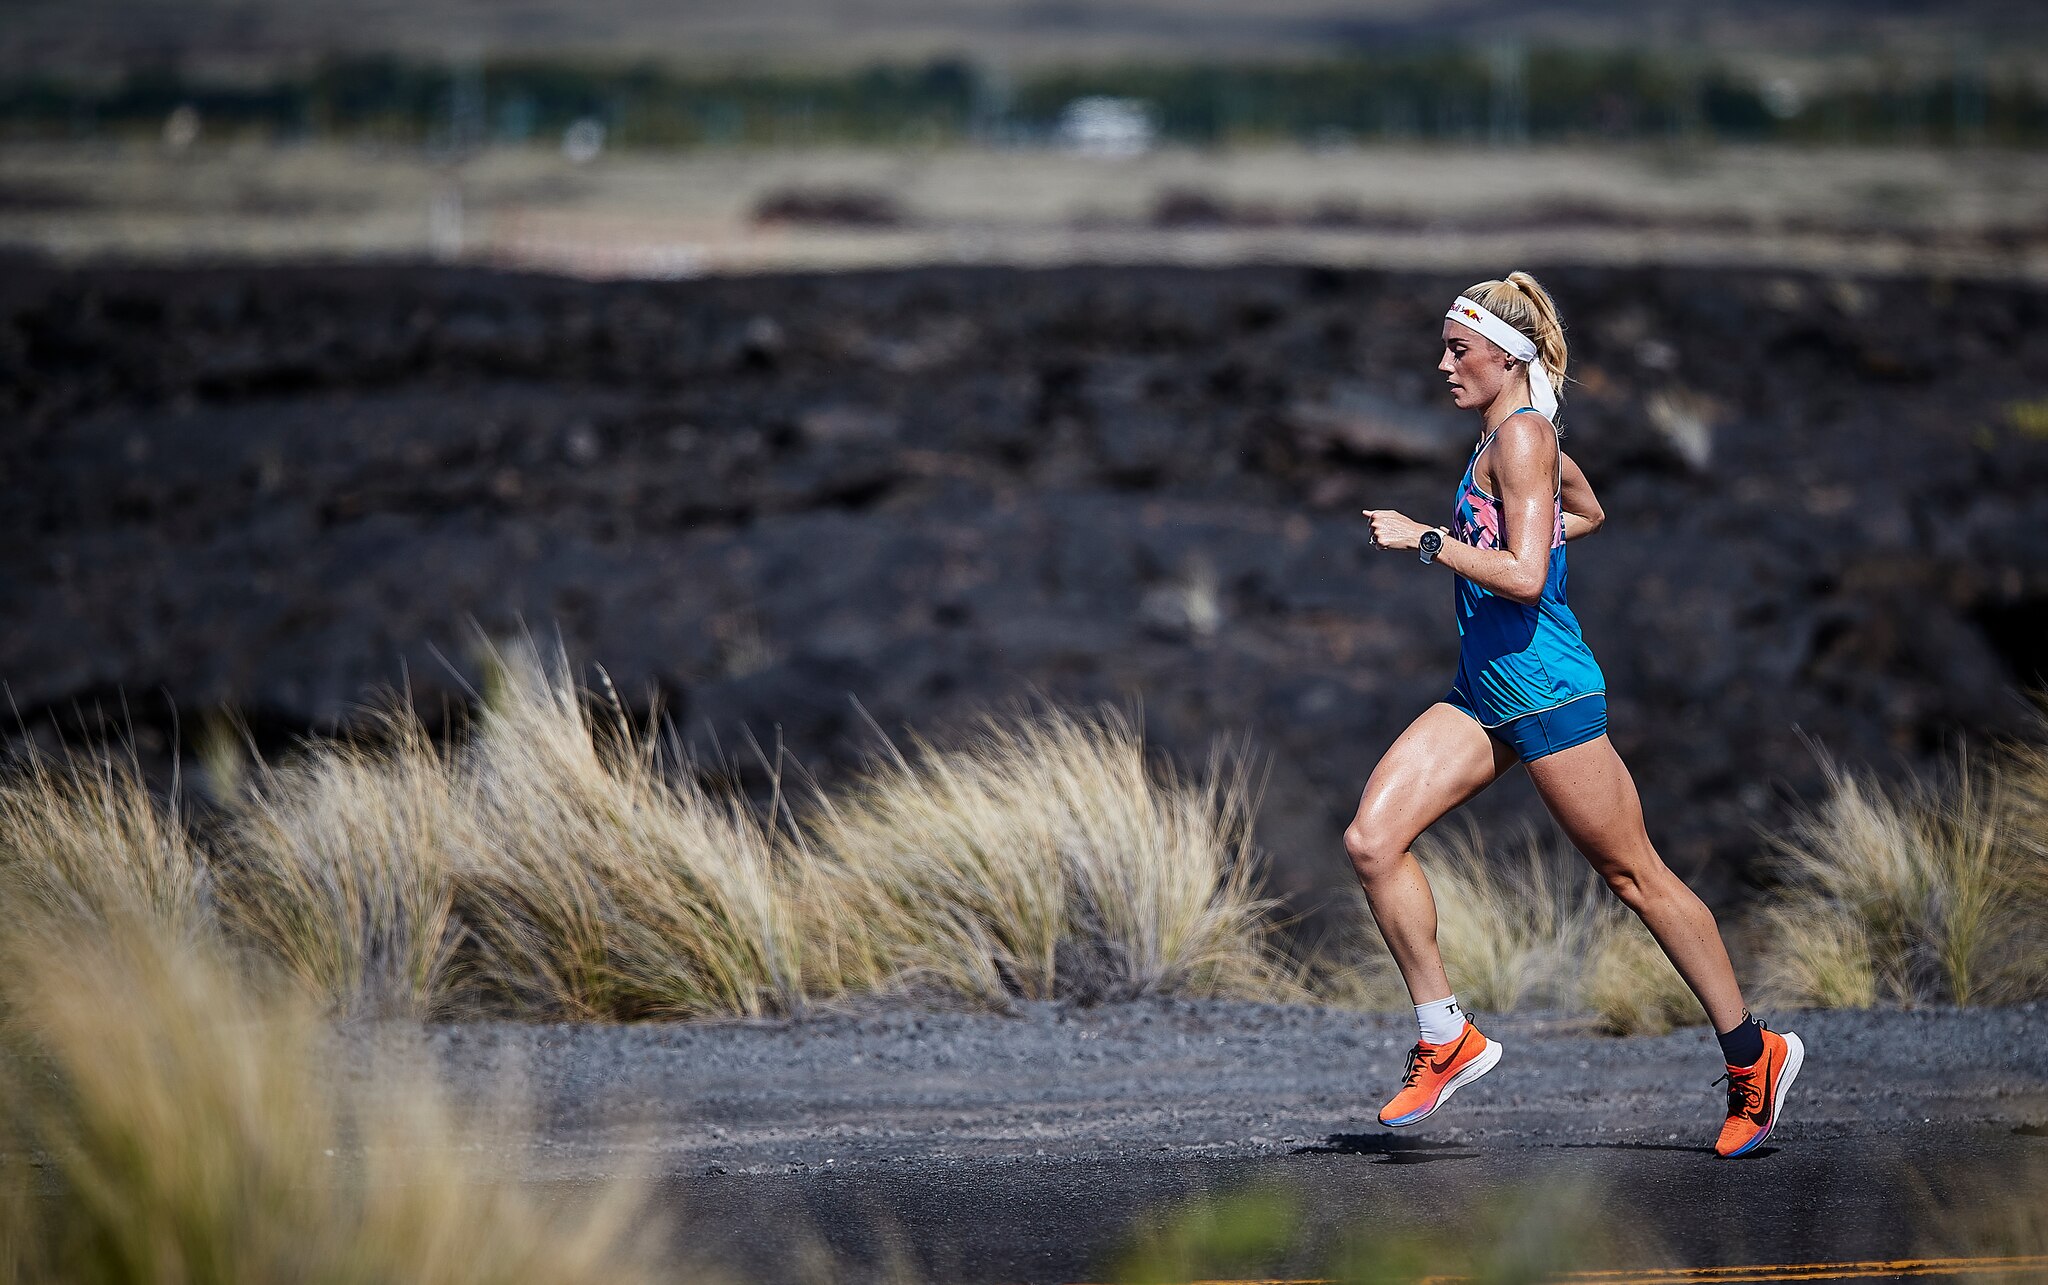 Lucy Charles Barclay is seen training before the IRONMAN World Championship in Kailua-Kona, Hawaii, United States on October 2, 2019. // James Mitchell / Red Bull Content Pool // SI201910110381 // Usage for editorial use only //